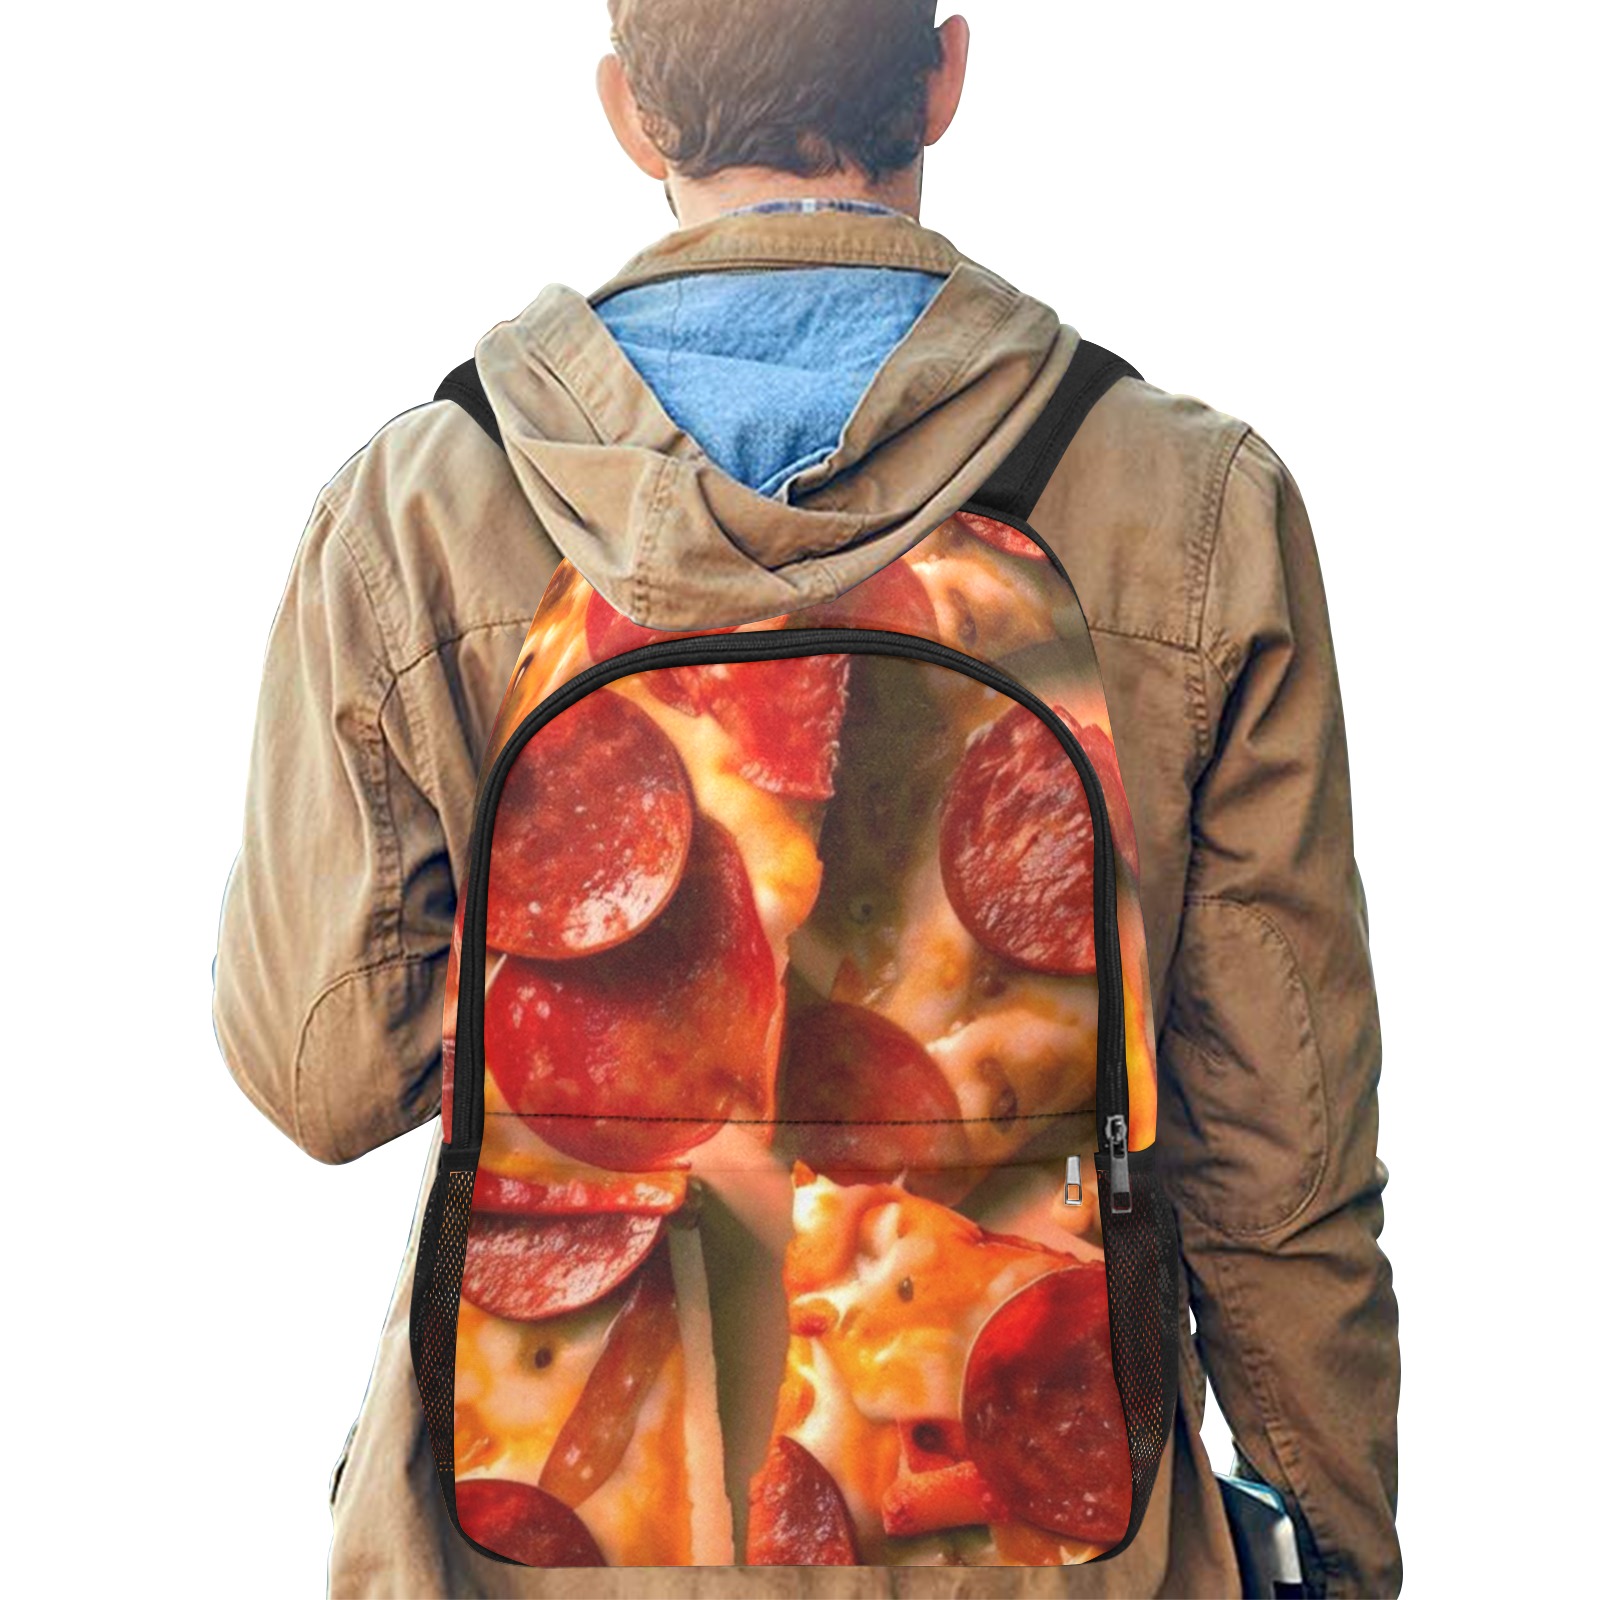 PEPPERONI PIZZA 11 Fabric Backpack with Side Mesh Pockets (Model 1659)